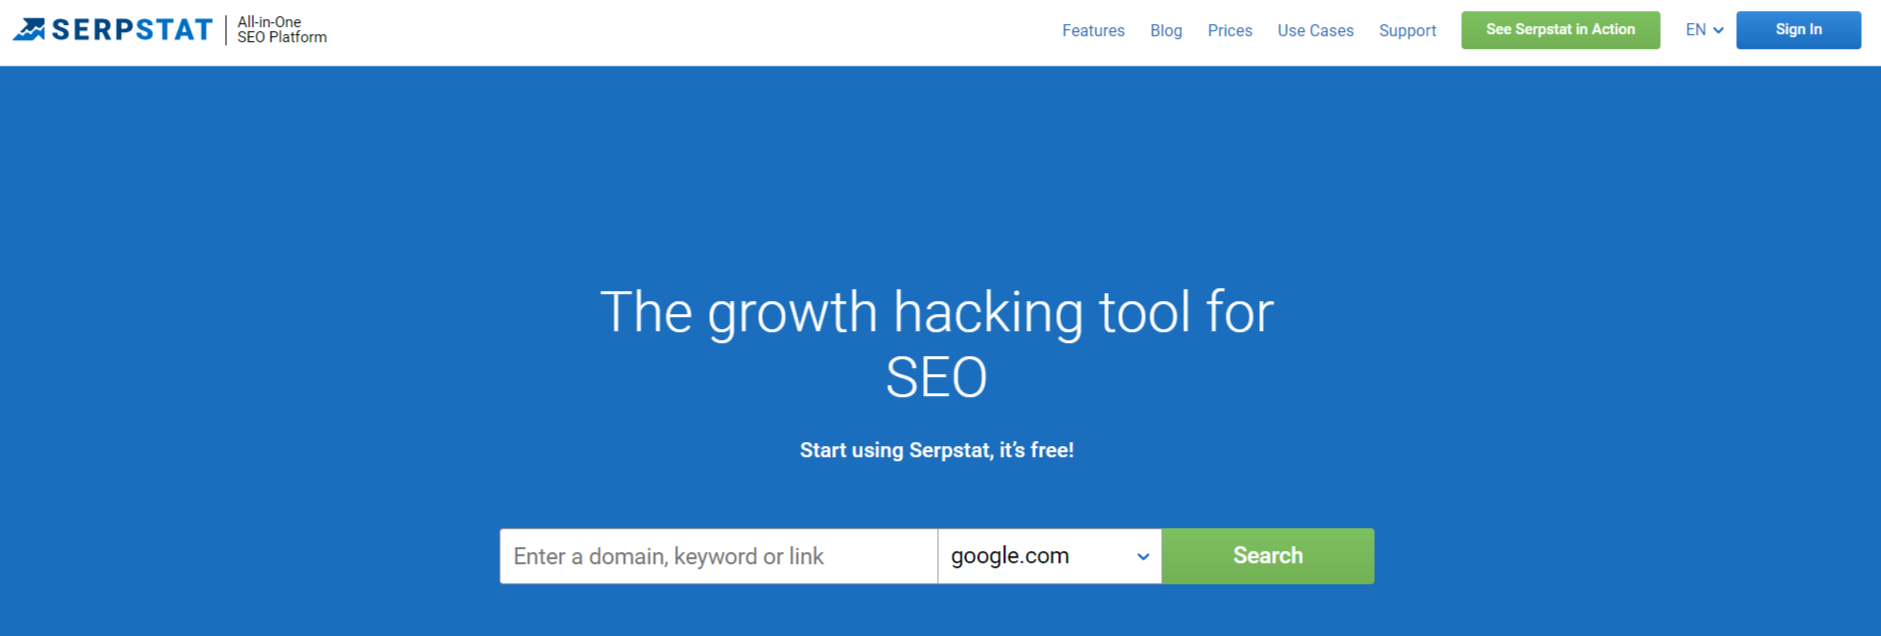 Serpstat Review - Growth hacking tool voor SEO Serpstat Review - Growth hacking tool voor SEO